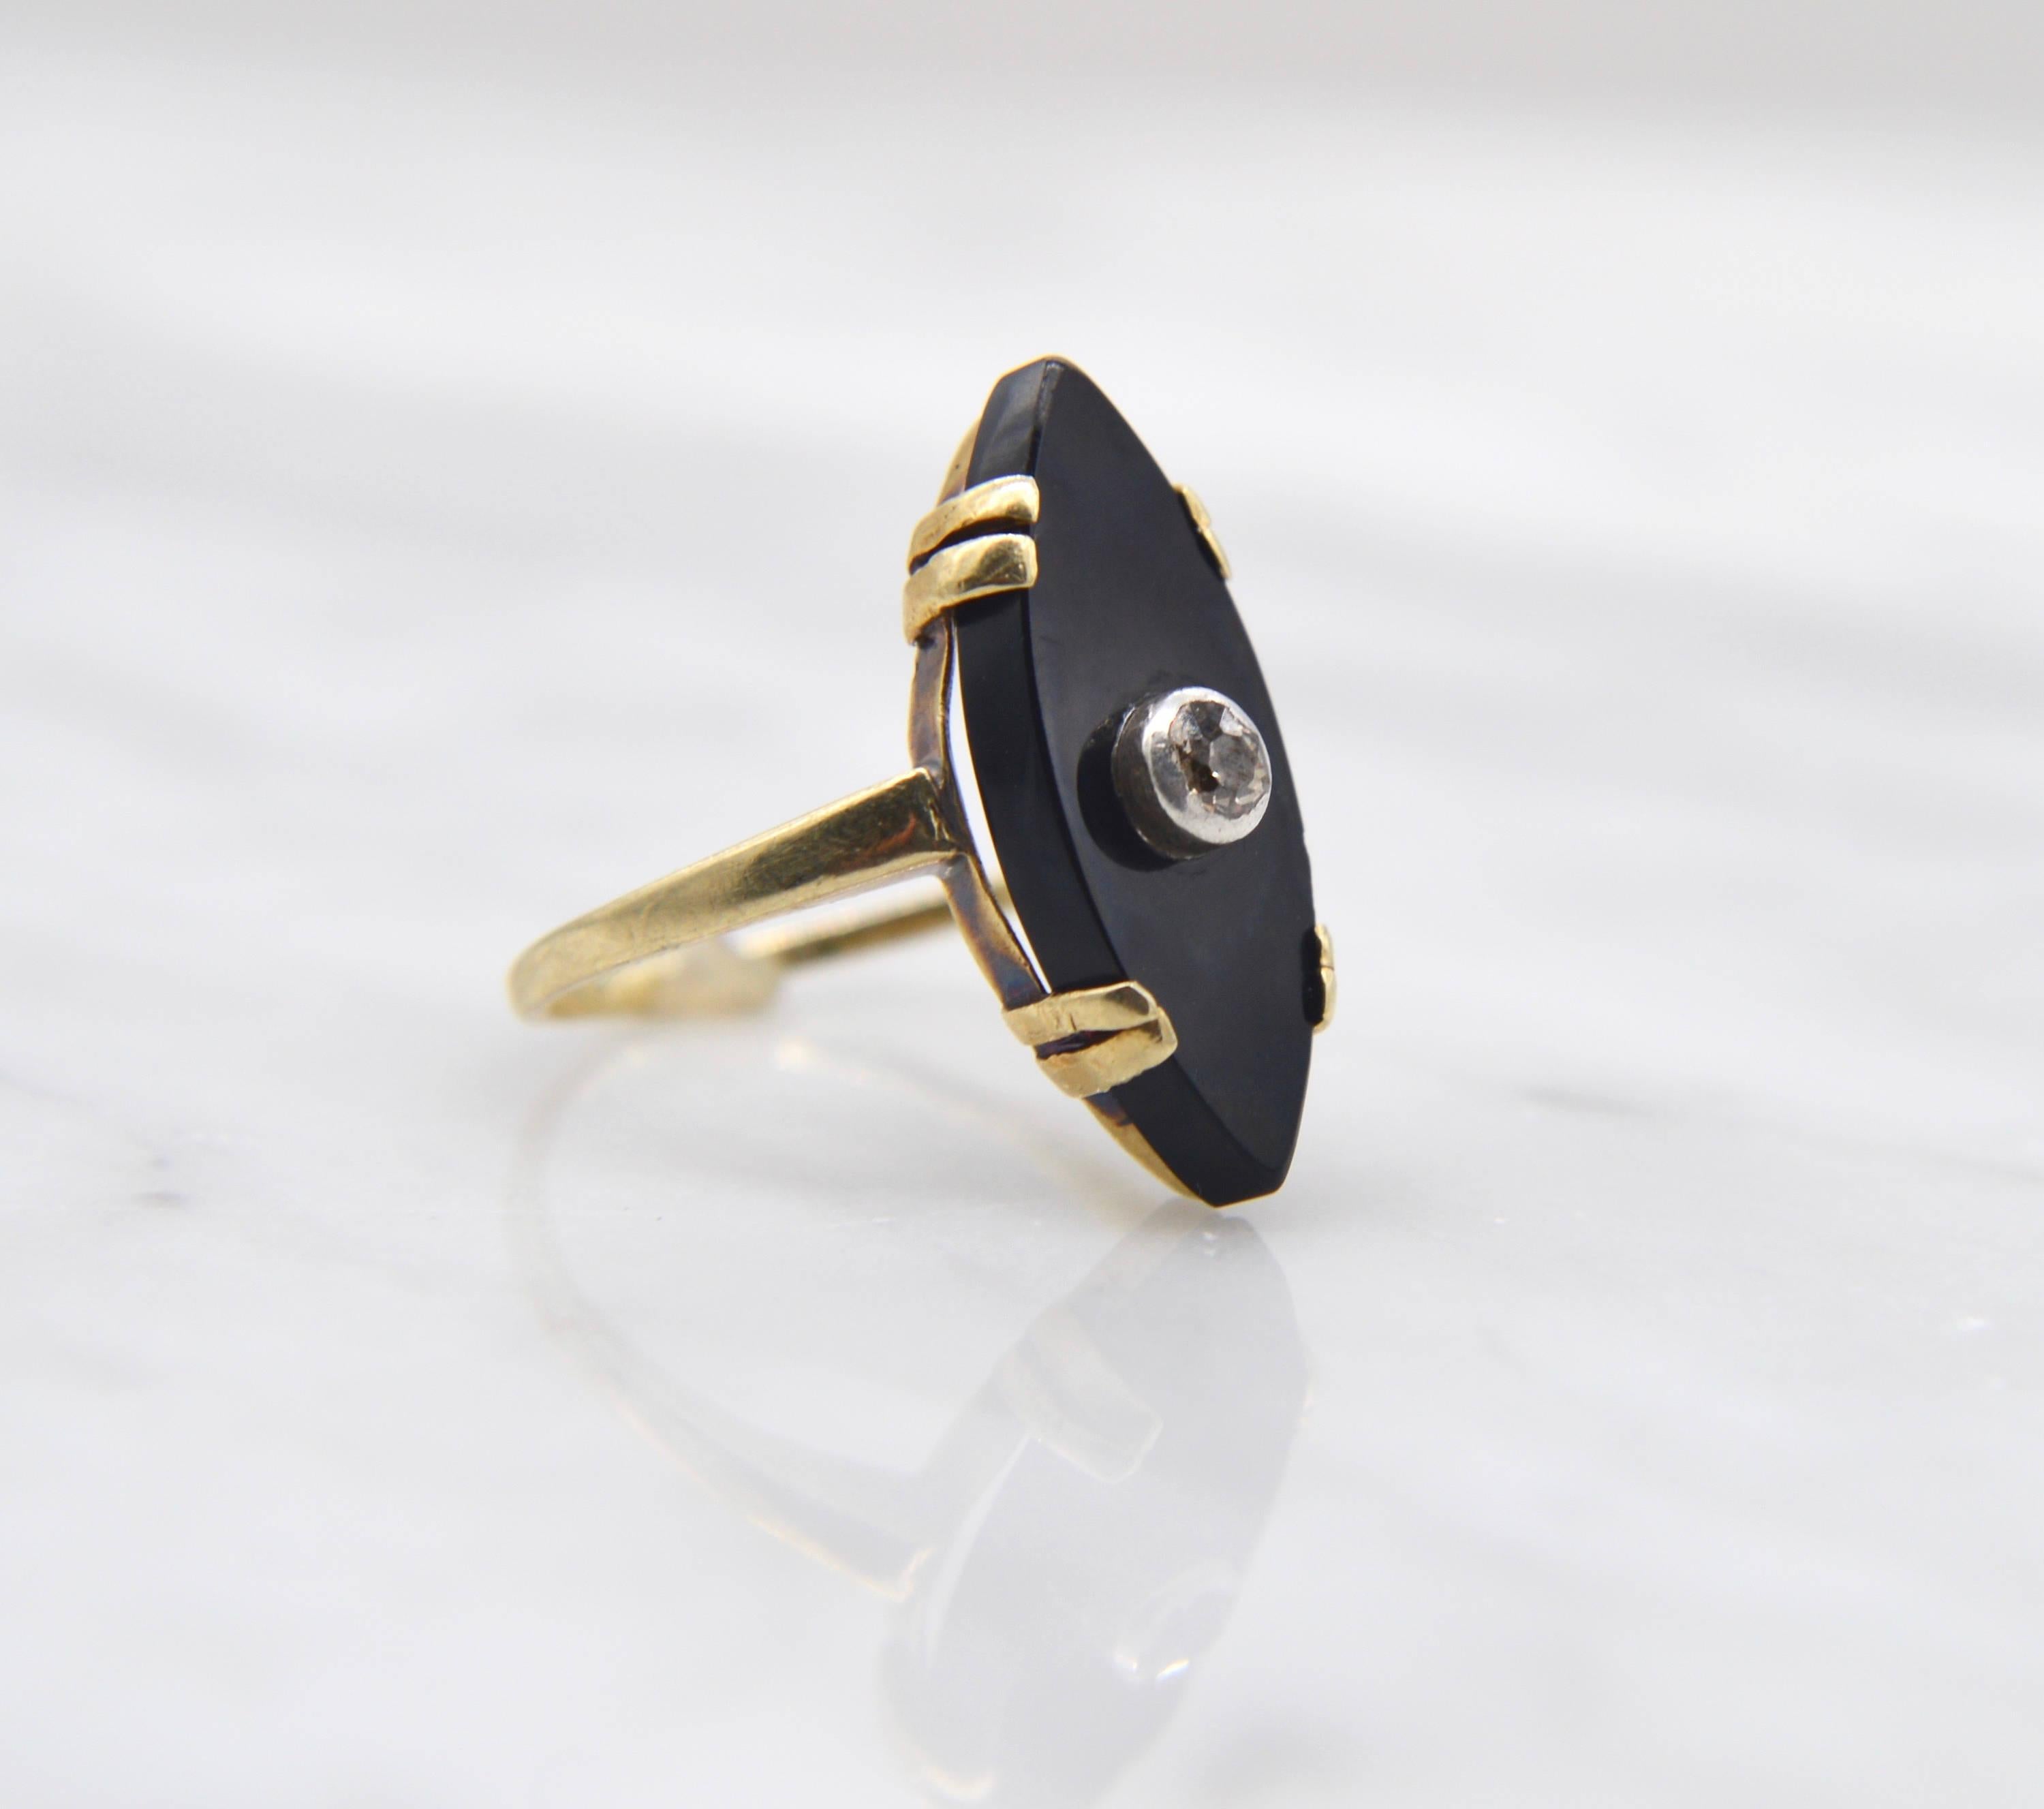 Spectacular Victorian era antique circa 1880s onyx navette ring with an amazing old European cut diamond in 14K yellow gold. Size 5.5 and can be resized by a jeweler. In very good condition. Onyx measures 20x7mm, the sparkling white diamond with no